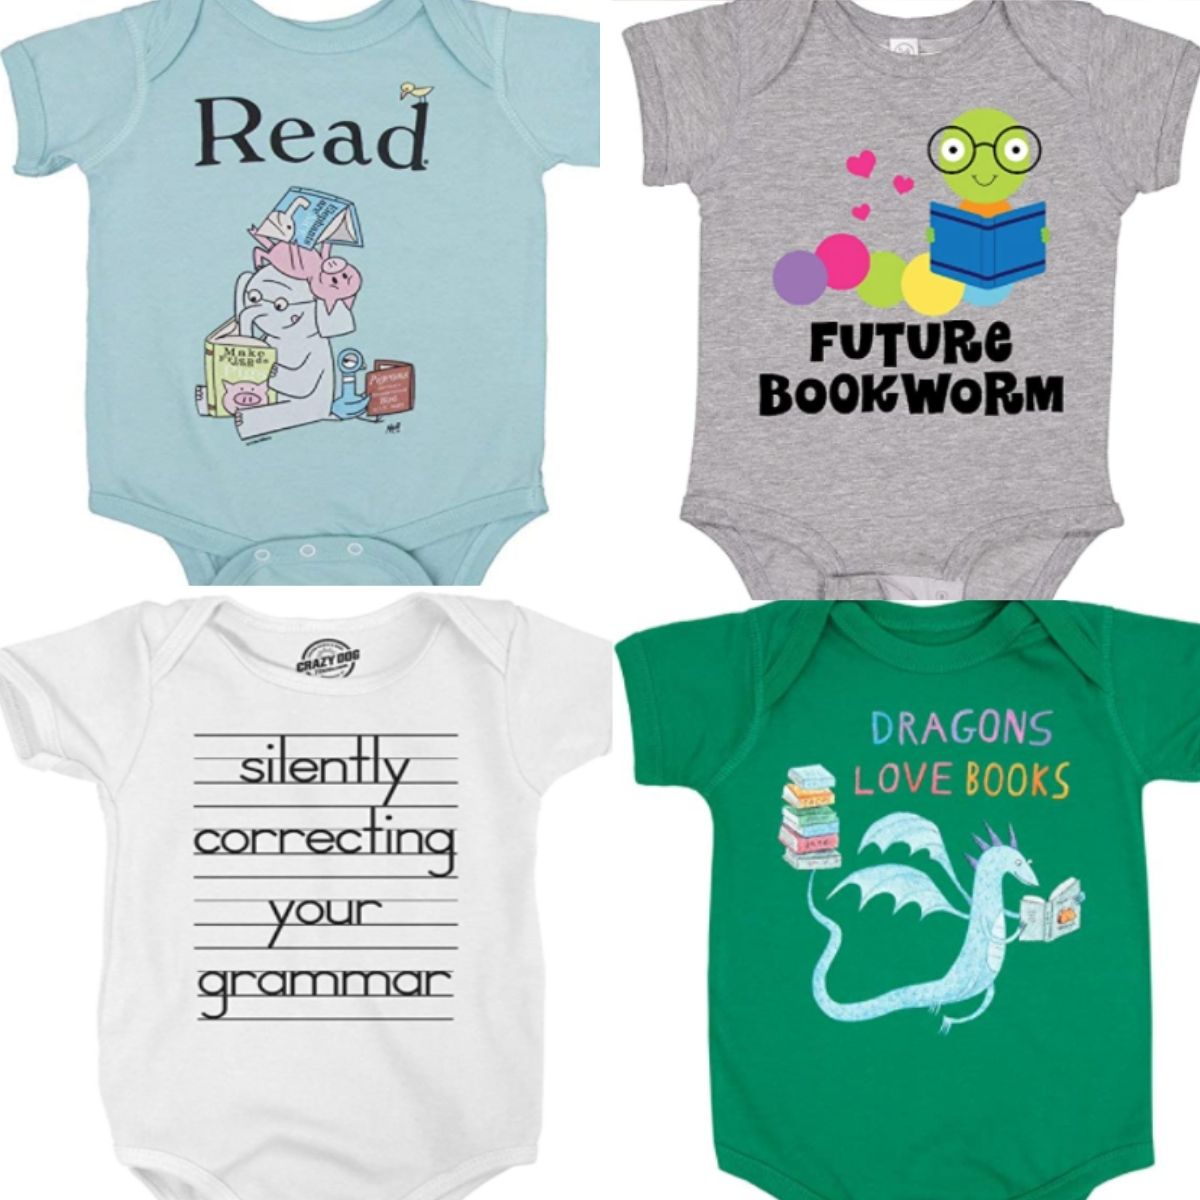 4 baby onesies with book themes on the design.